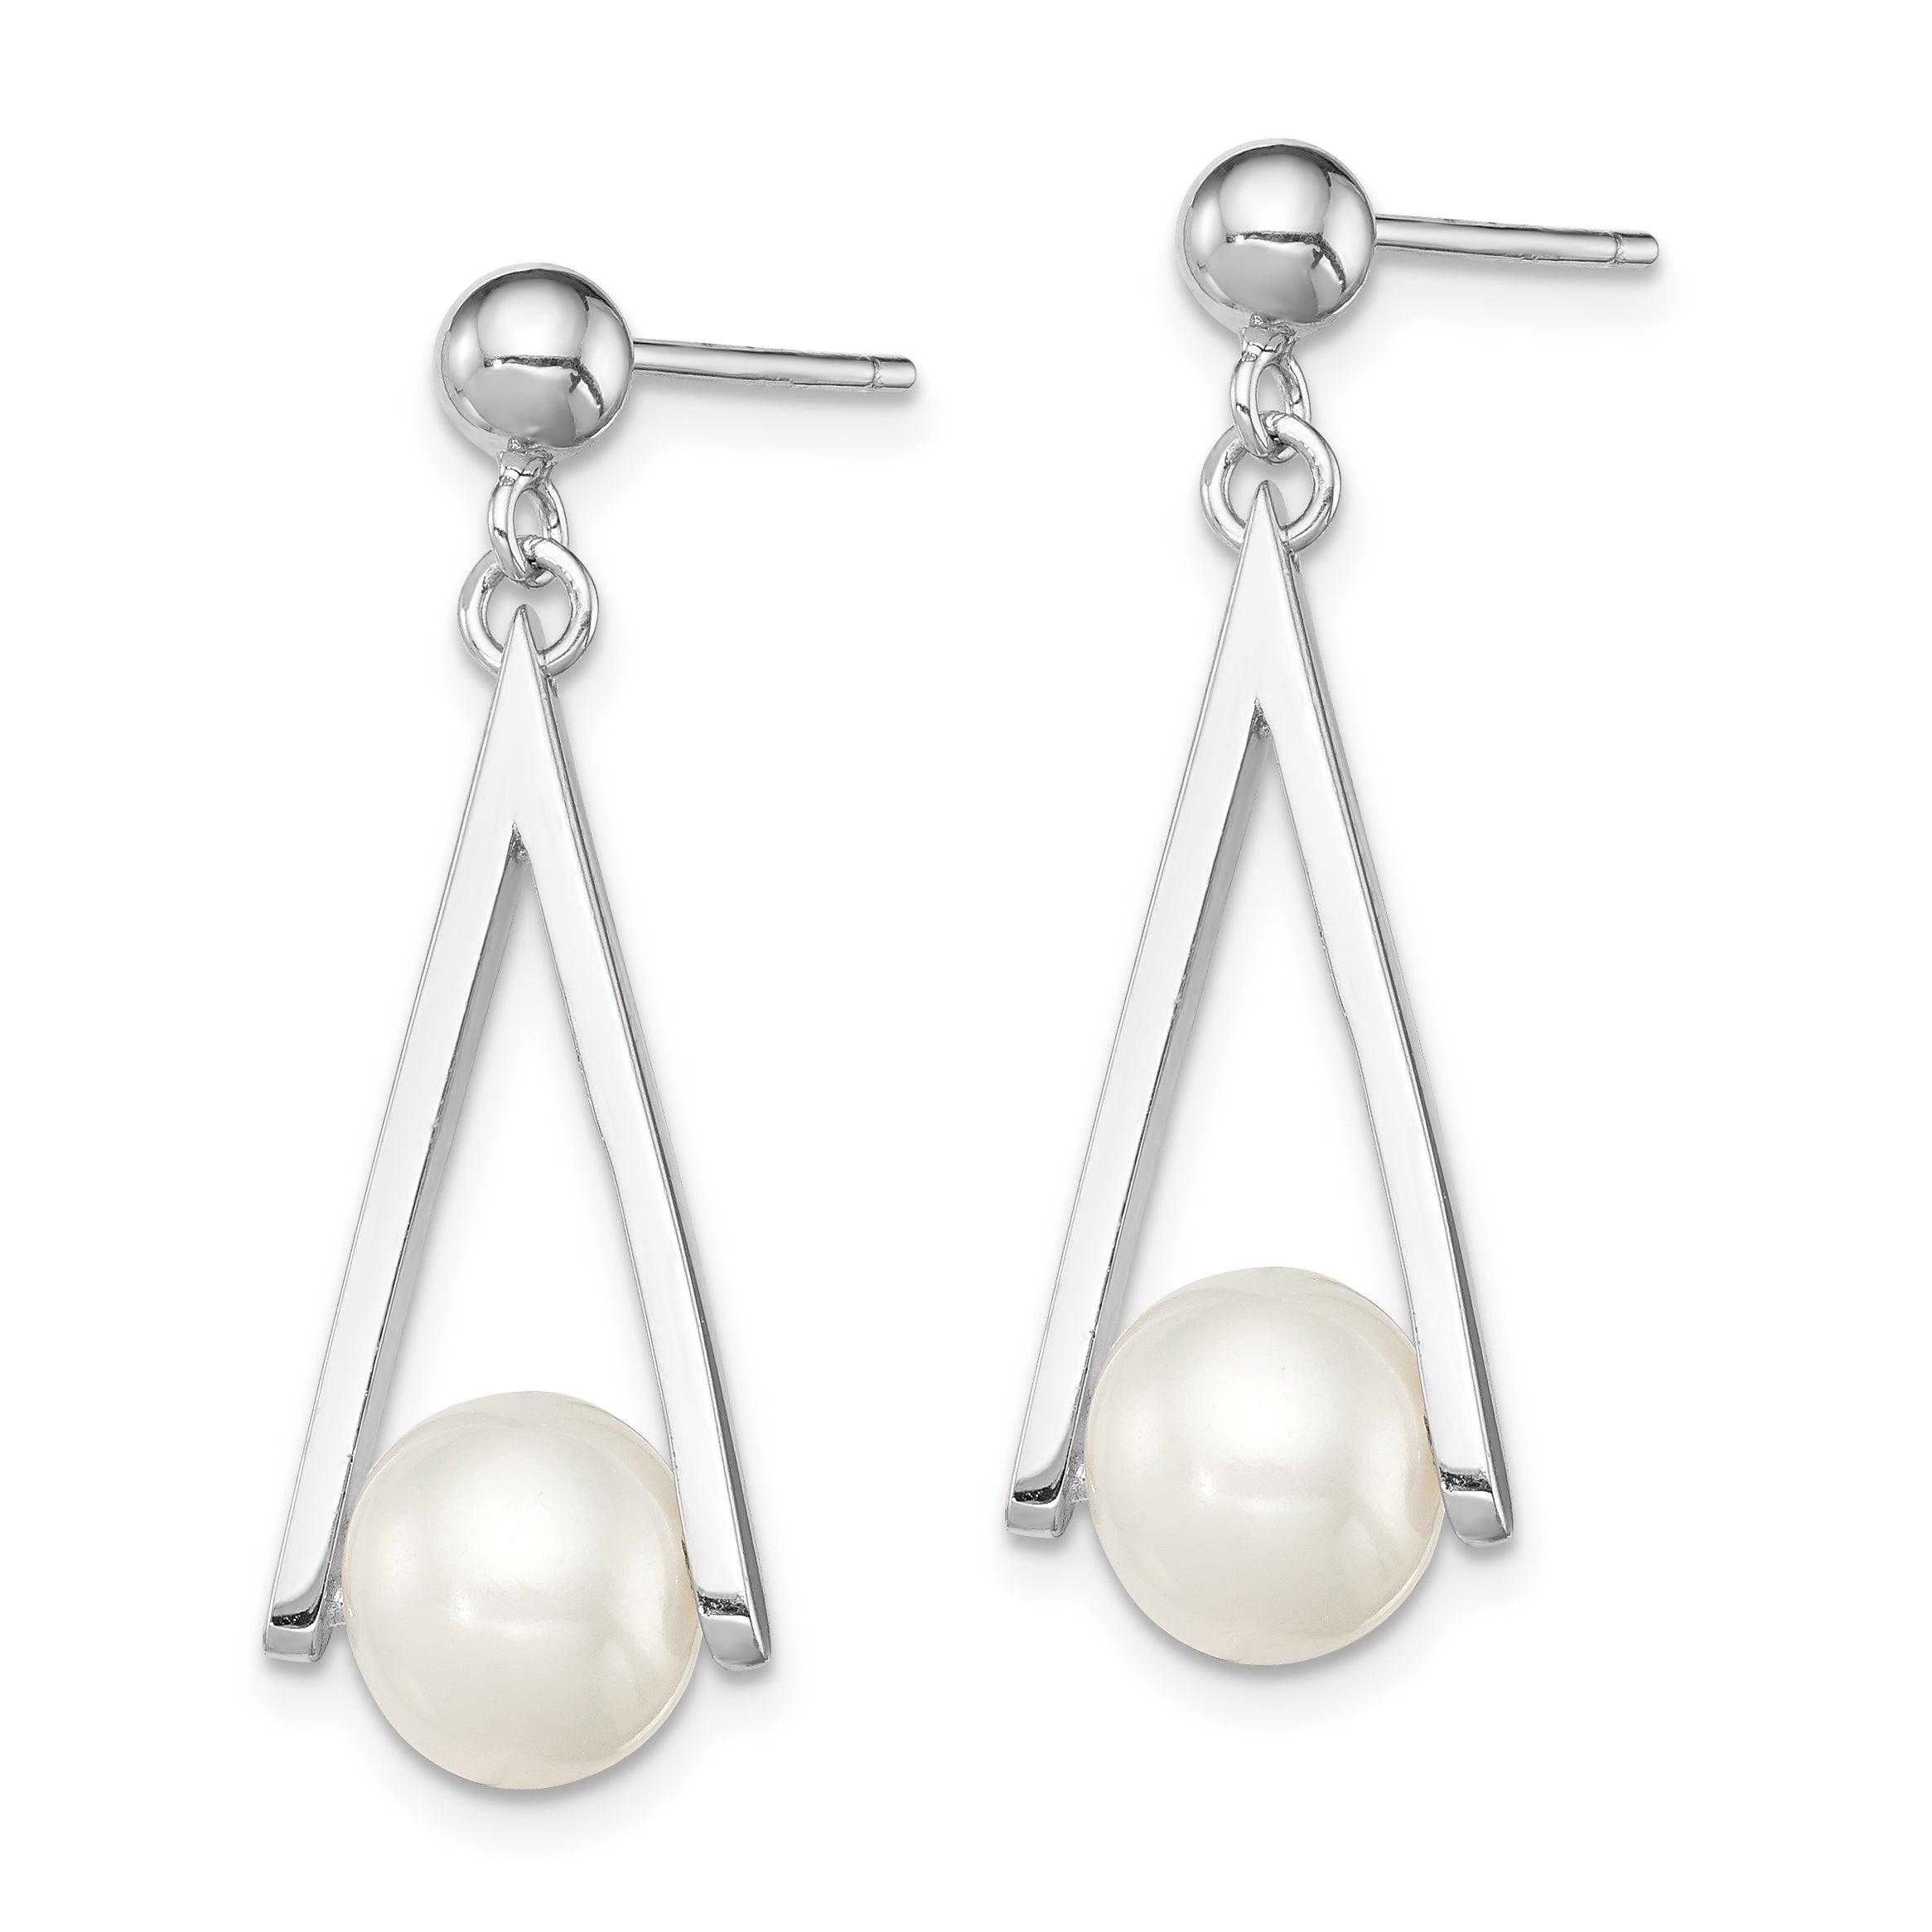 Sterling Silver Rhodium Plated 8-9mm White Freshwater Cultured Pearl Dangle Geometric Post Earrings